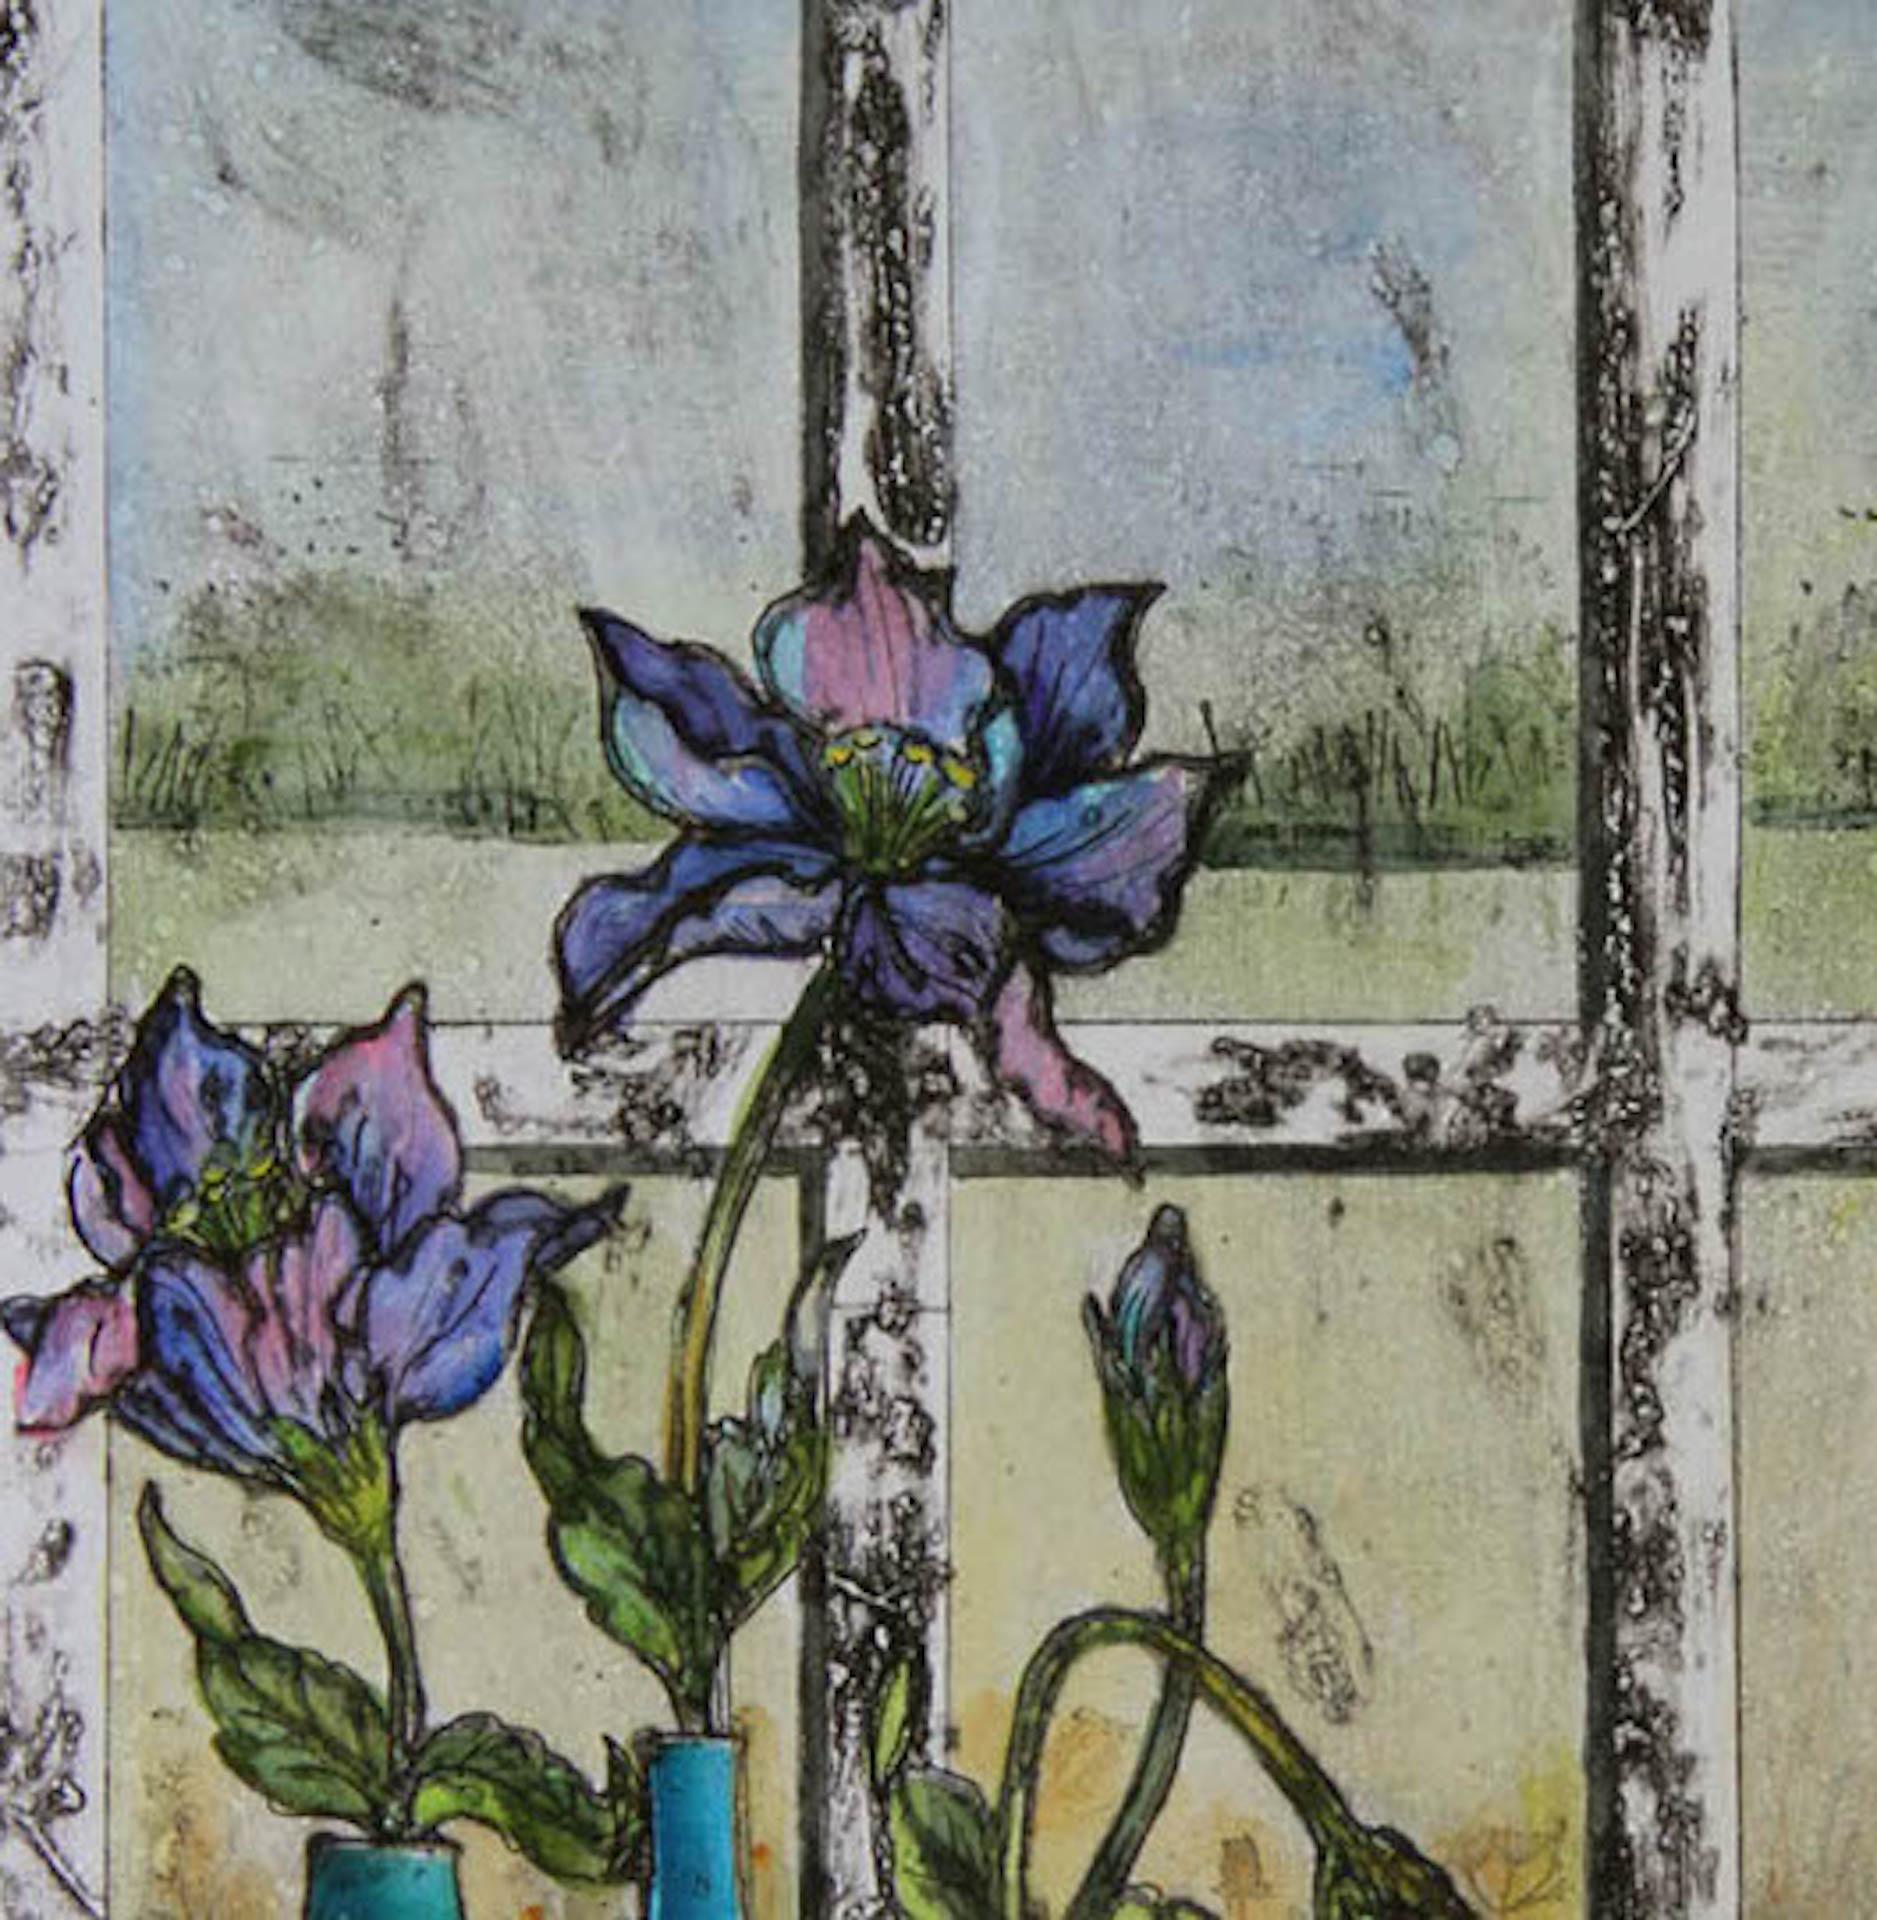 Vicky Oldfield
On My Windowsill
Limited Edition Hand Coloured Collagraph Print with Chine Colle
Edition of 30
Image Size: H 50cm x W40cm
Sheet Size: H 60cm x W 50cm x D 0.1cm
Sold Unframed
Free Shipping

 

On My Windowsill is a limited edition